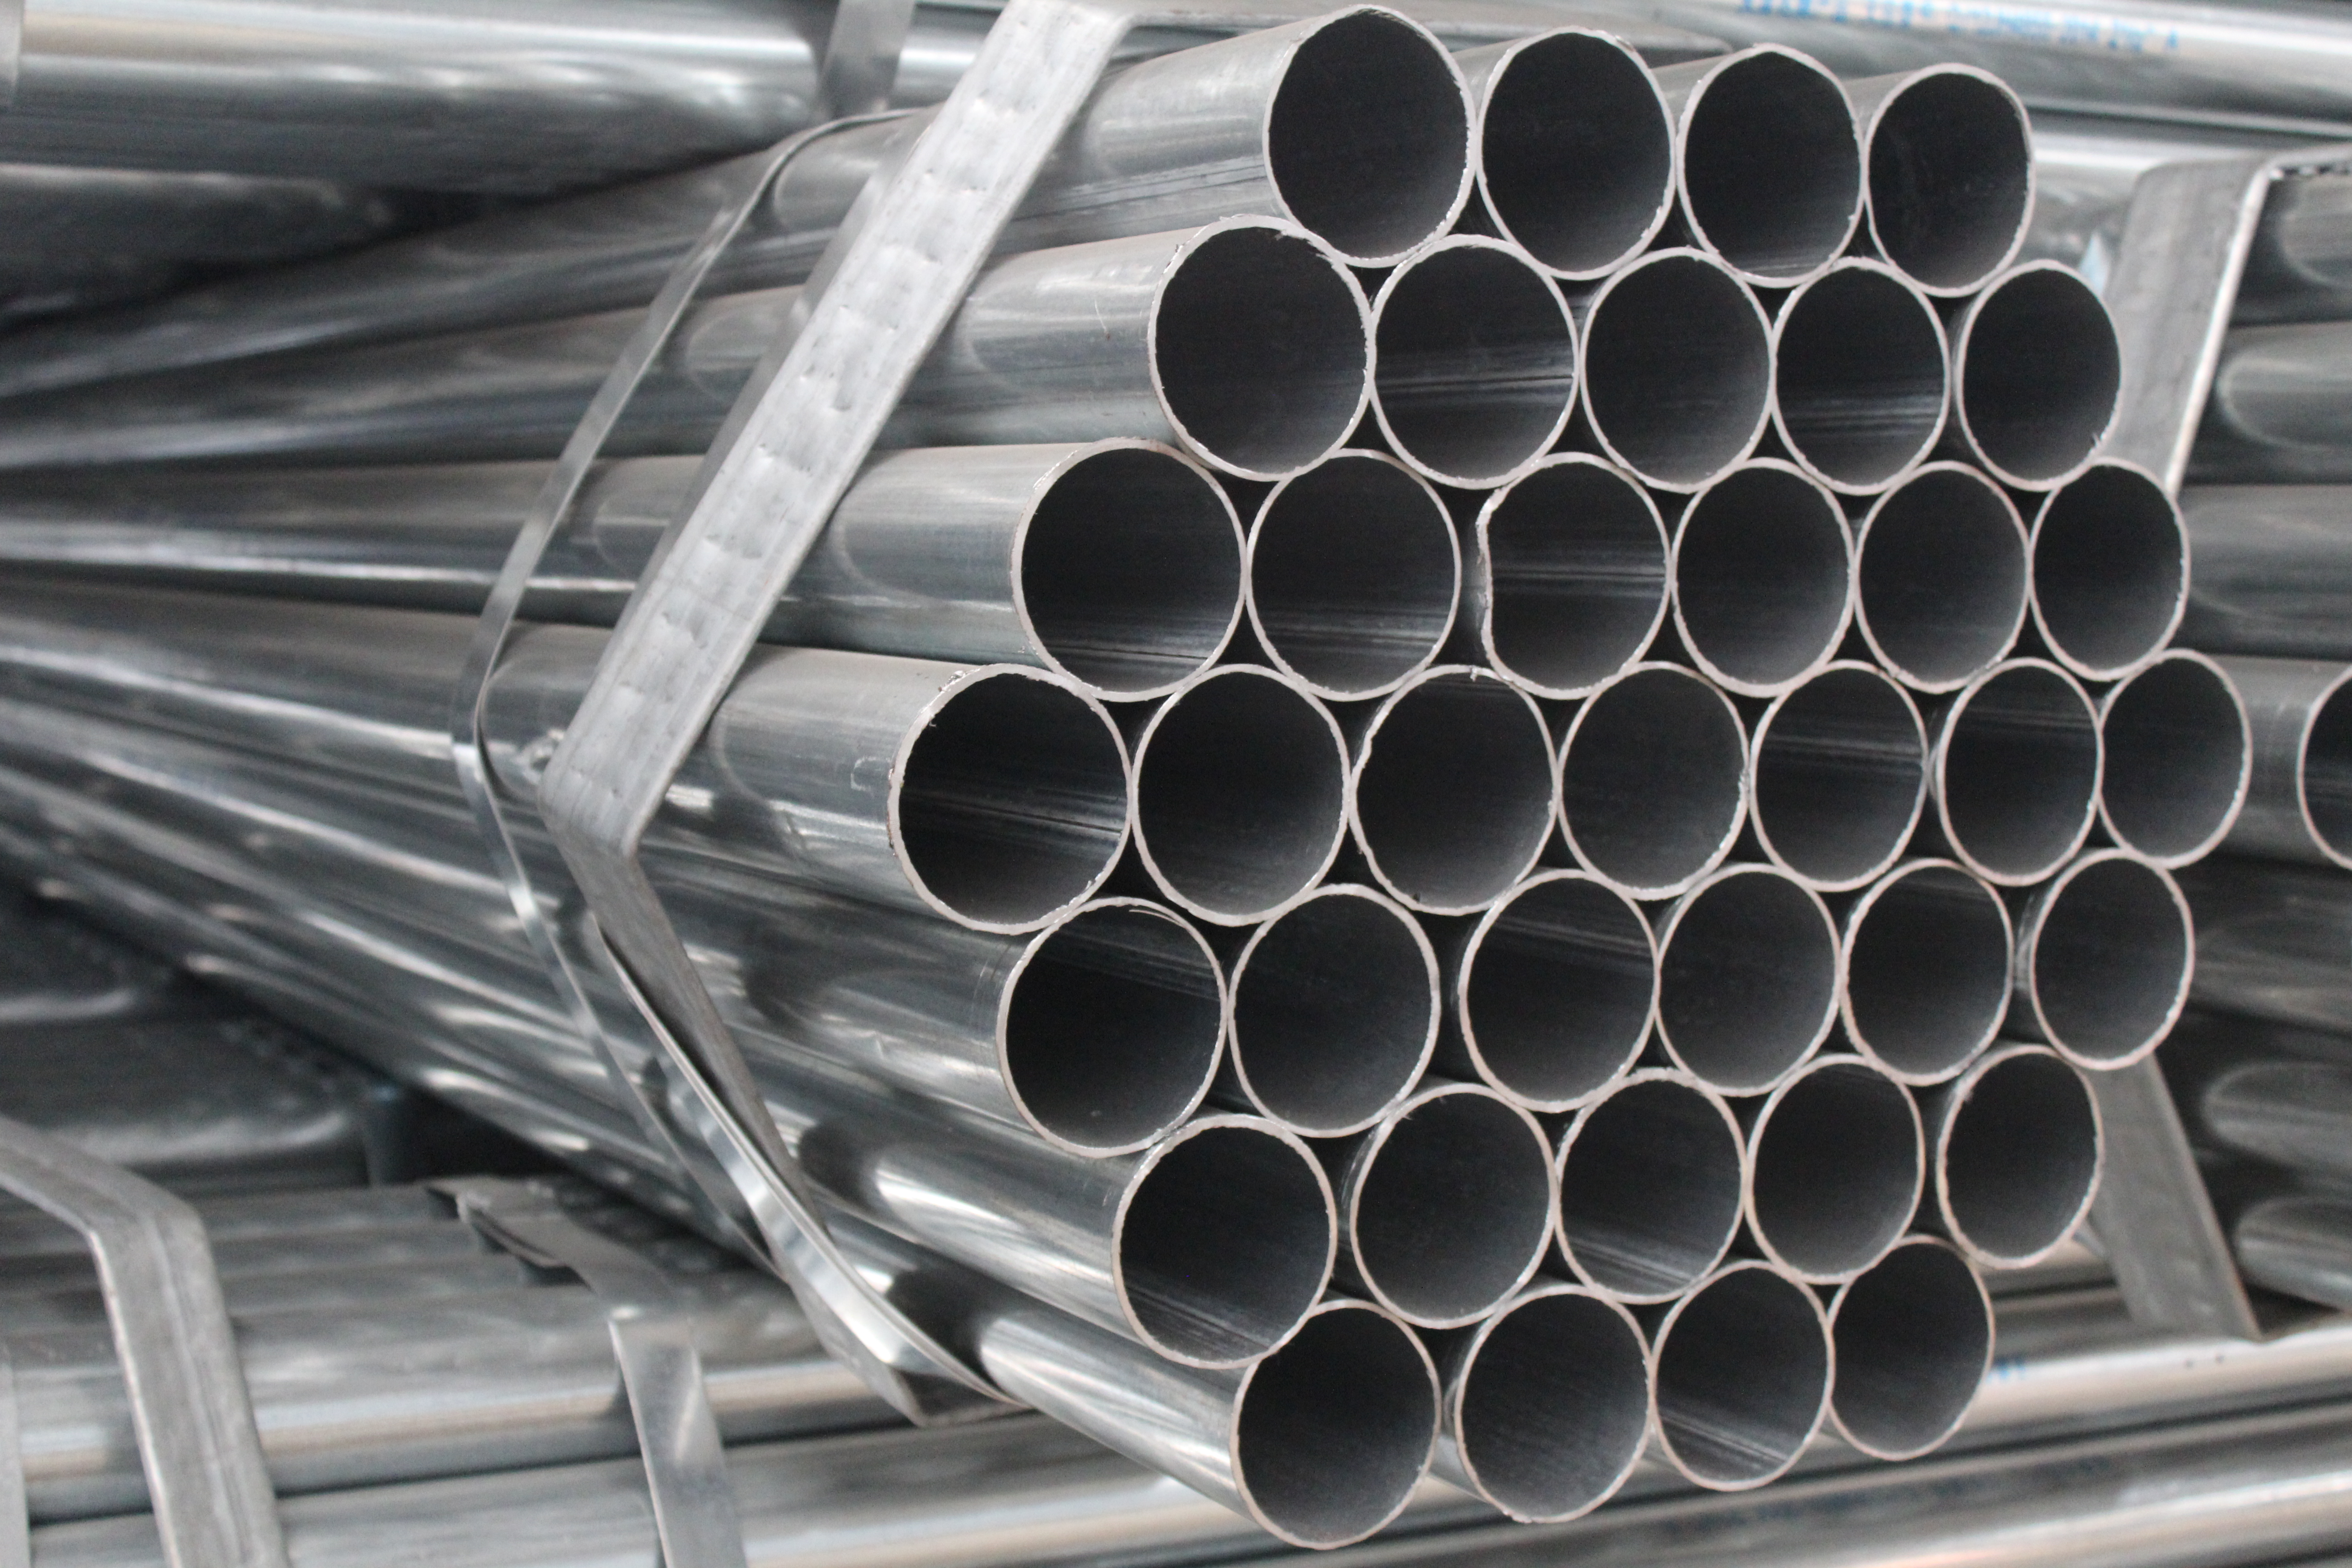 What are the requirements for the storage of galvanized pipe？